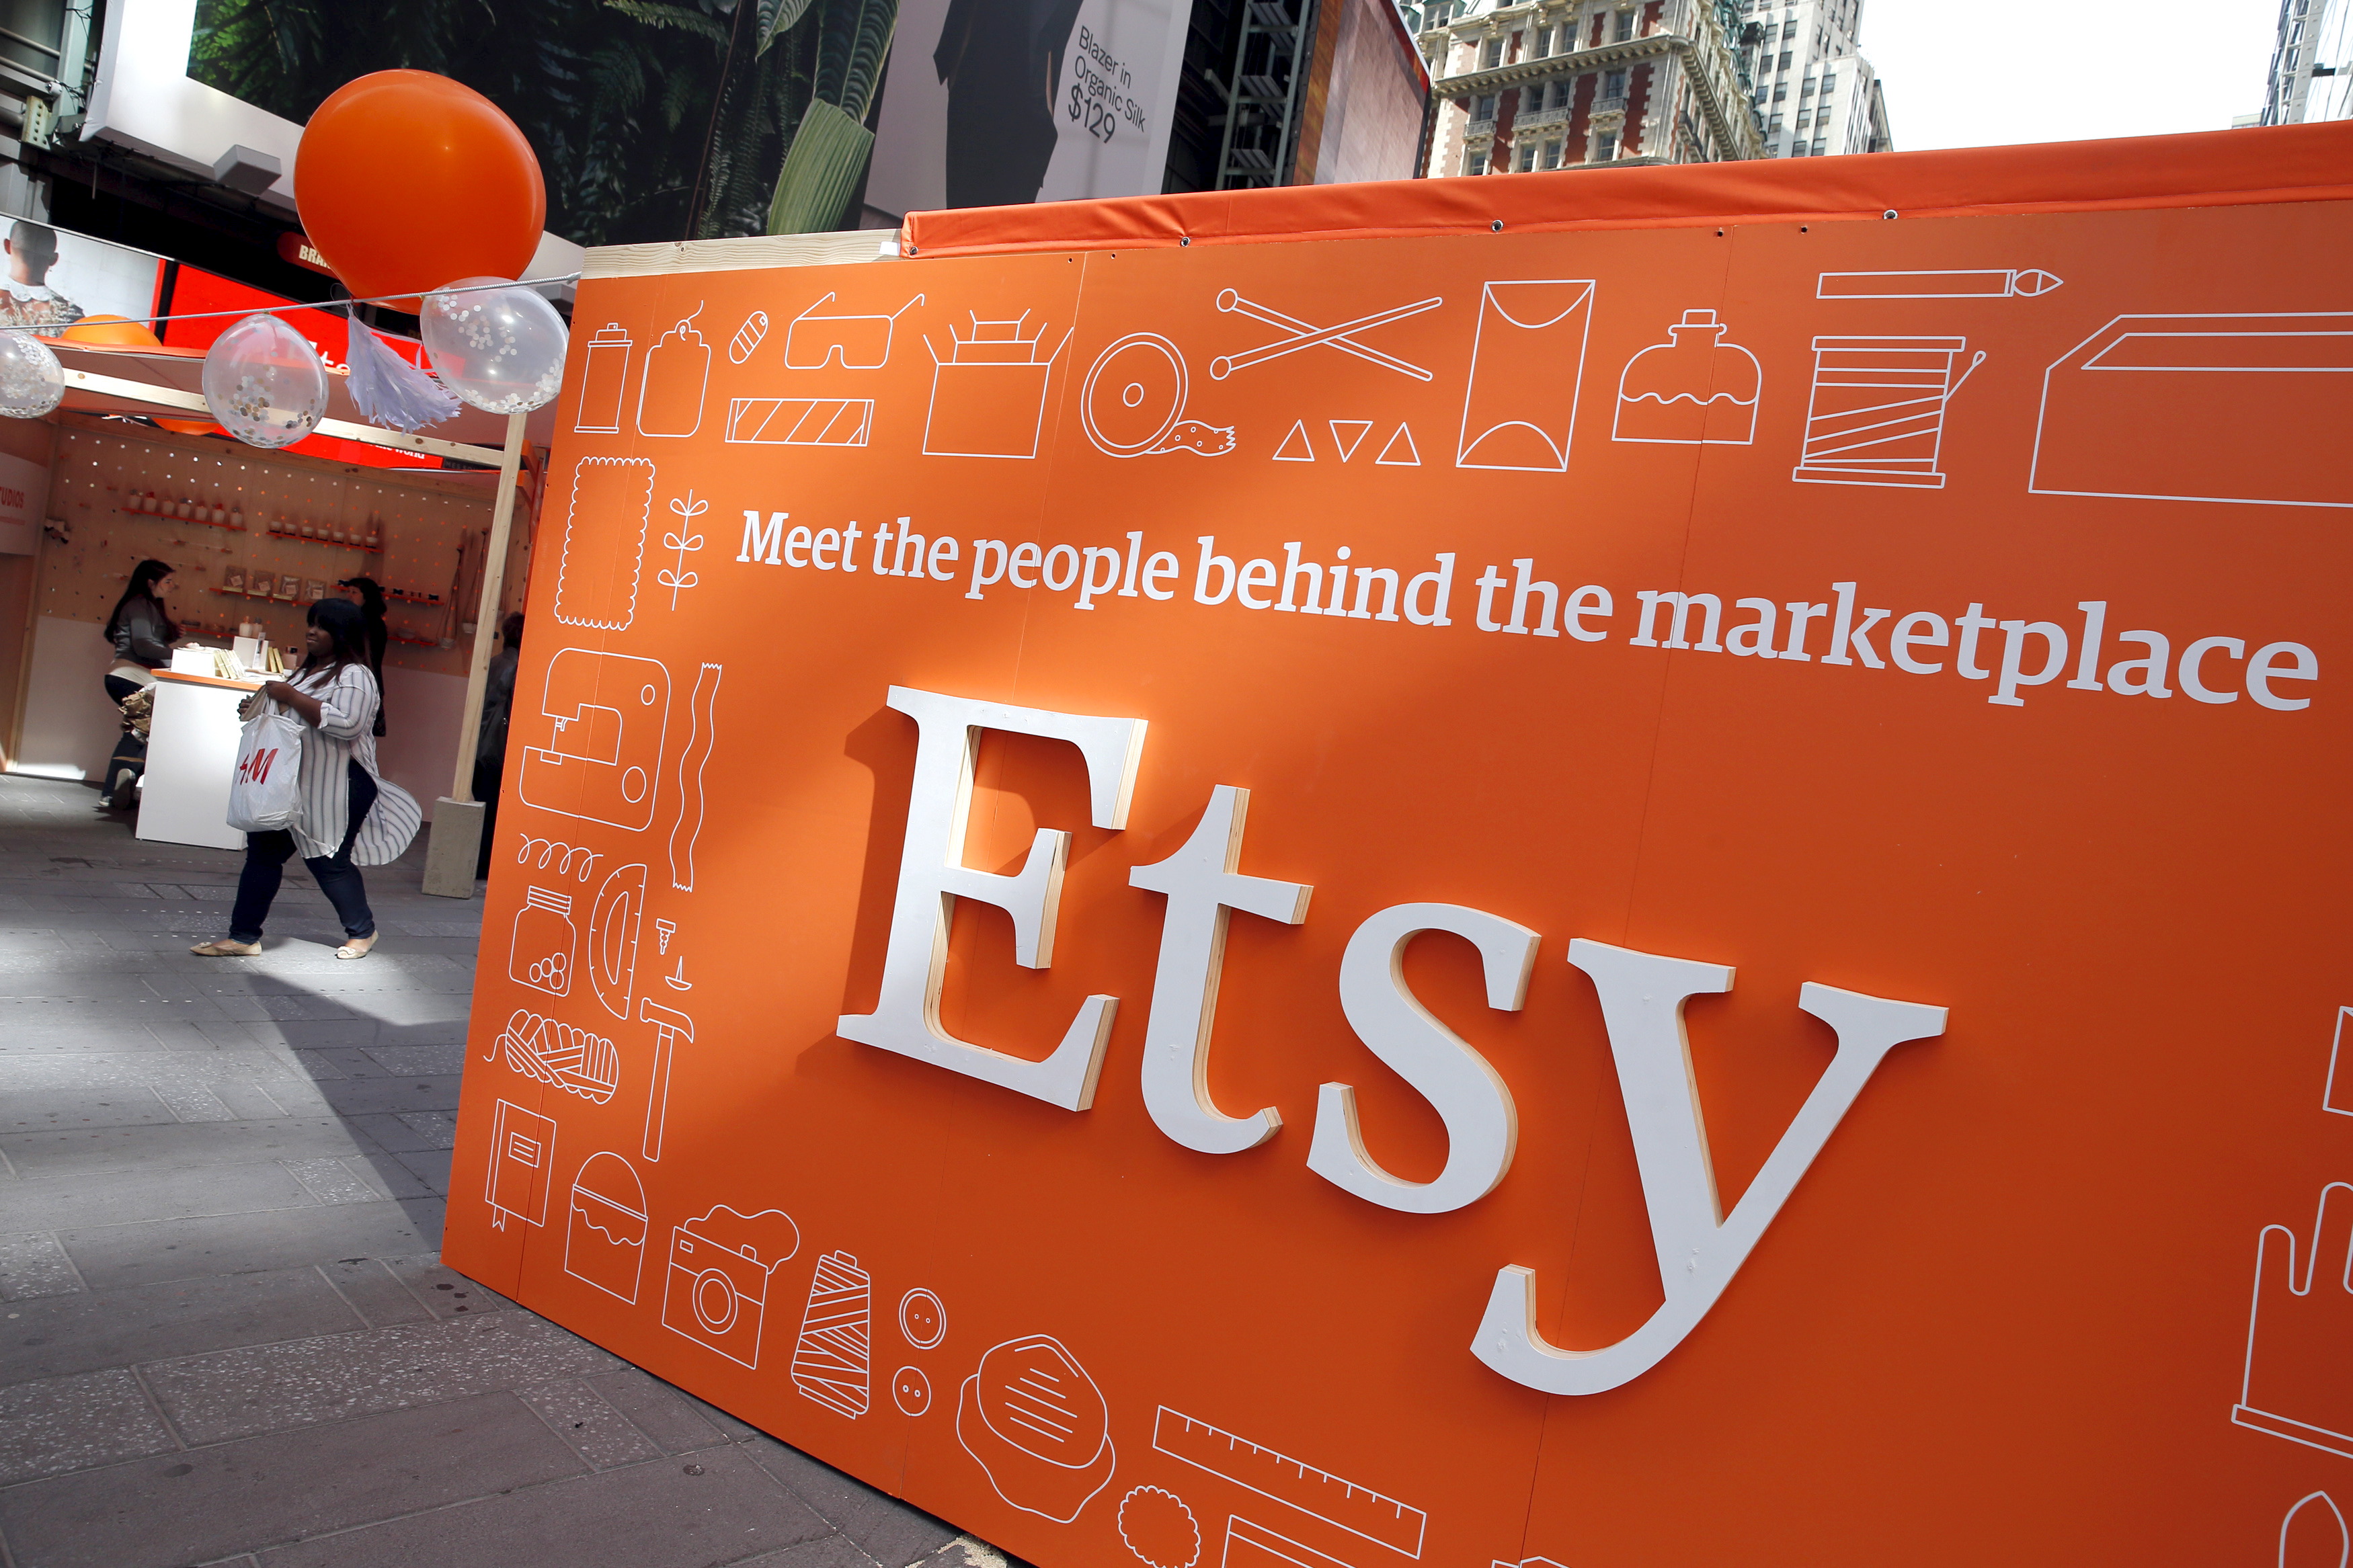 Etsy introduces purchase protection measures for both buyers and sellers